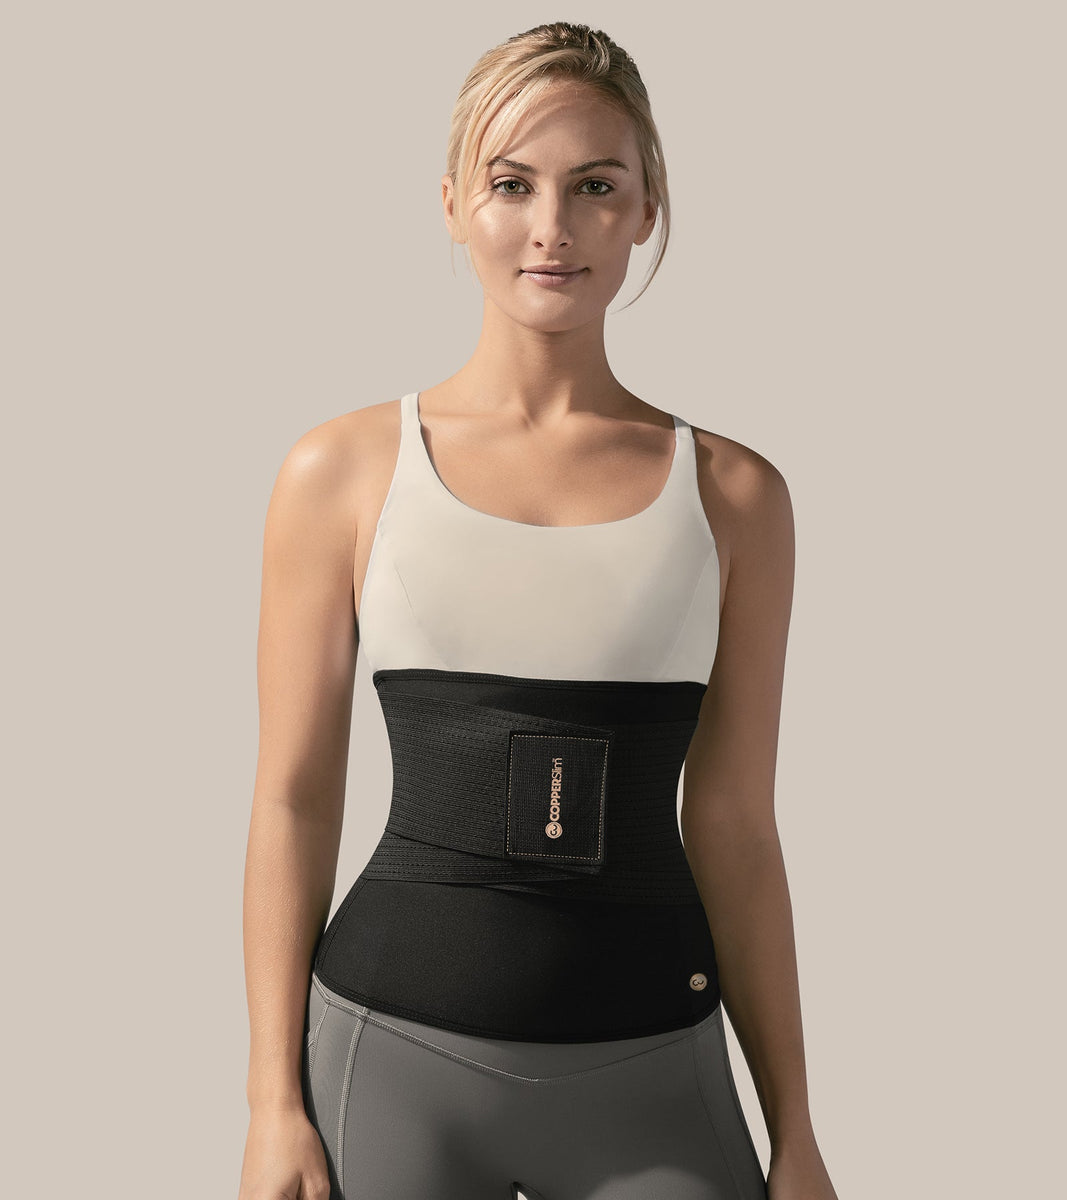 Waist Trimmer Belt - The Best Support to a Slimmer & Toned You